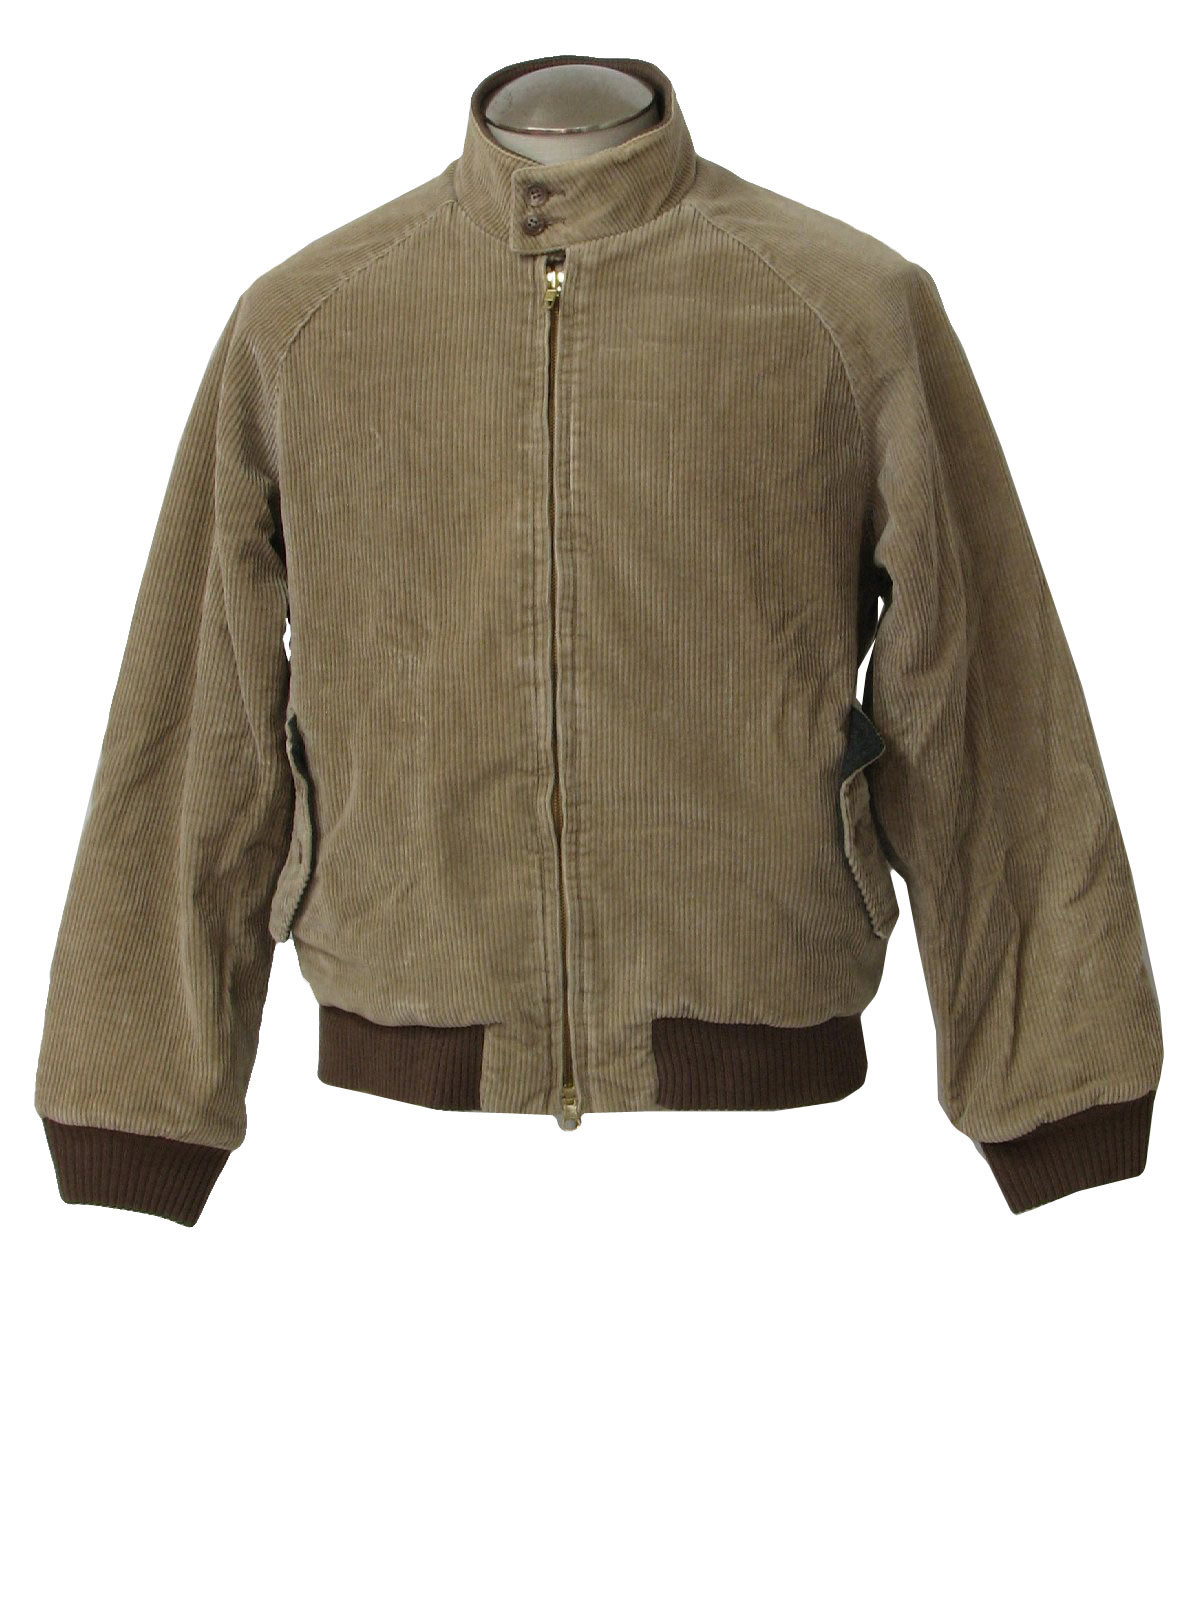 Retro 80's Jacket: 80s -Missing Label- Mens tan cotton polyester blend wide wale golf style 